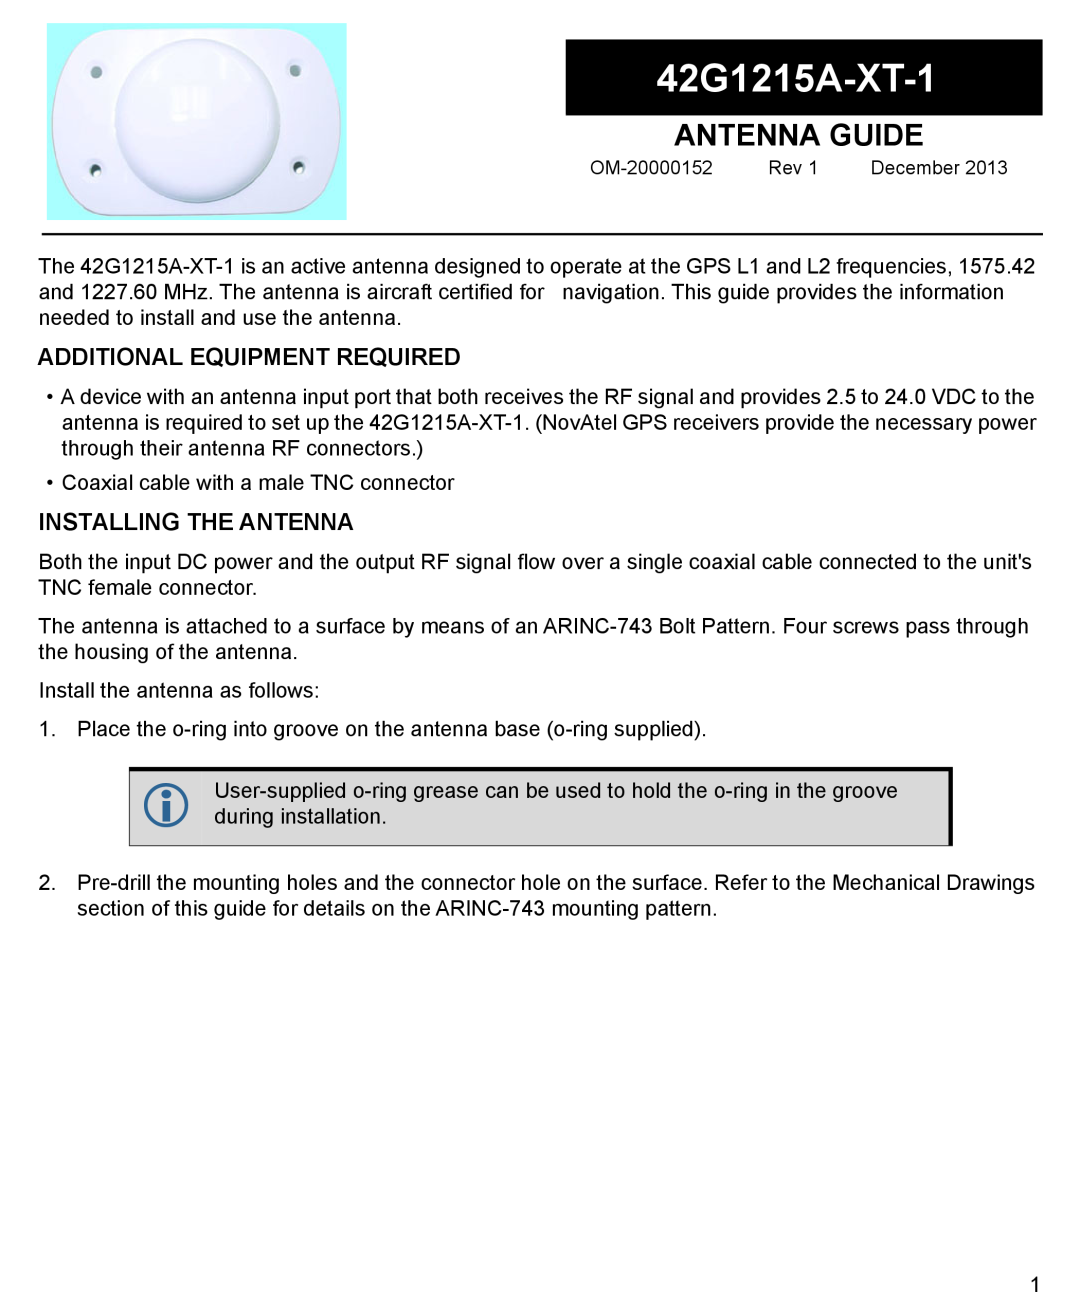 Novatel 42G1215A-XT-1 manual Additional Equipment Required, Installing The Antenna, Antenna Guide 